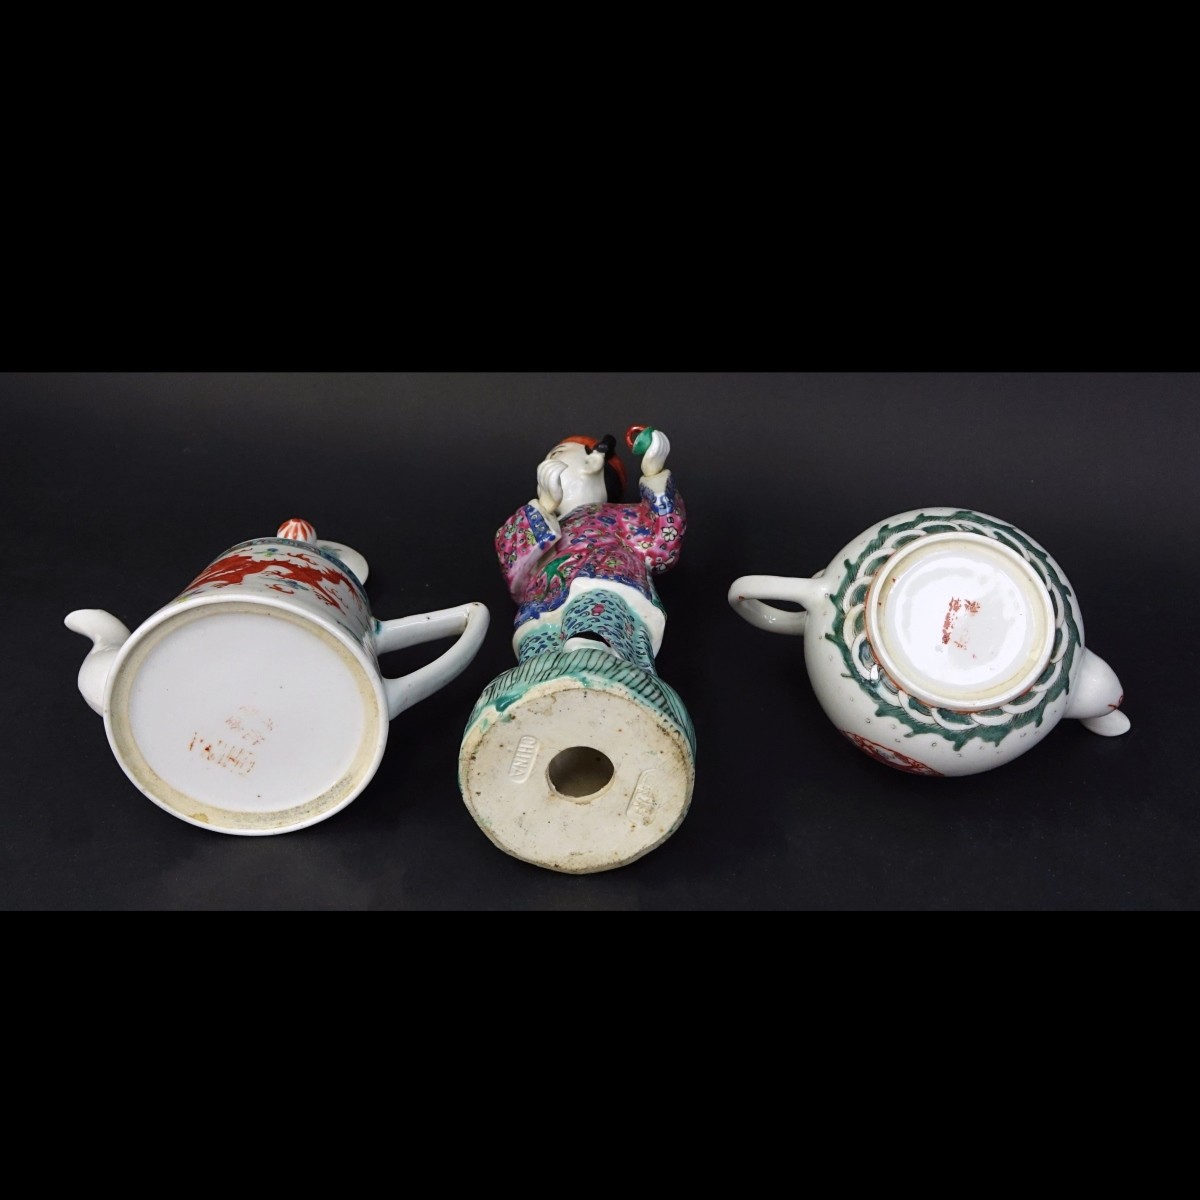 Three (3) Chinese Export Porcelain Tableware